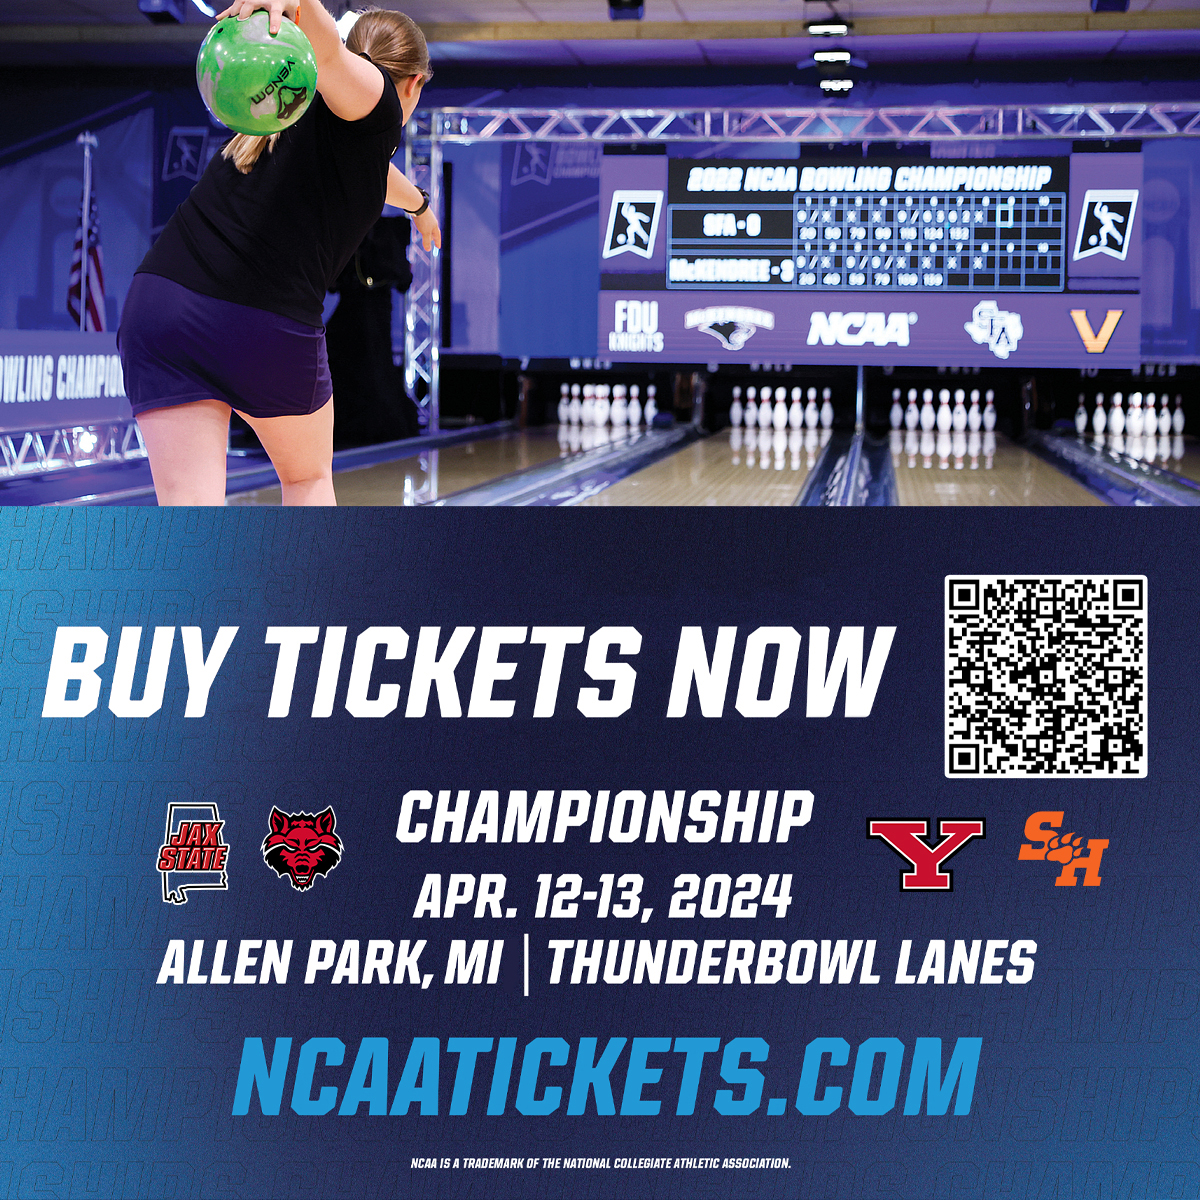 Don't miss the nation's top collegiate bowlers when they face off this week at the 2024 @NCAA Women's Bowling National Championships at Thunderbowl Lanes April 12-13 🎳 Click here to purchase tickets: bit.ly/4azOTGl #DetroitSports #NCAA #Bowling #NationalChampionship